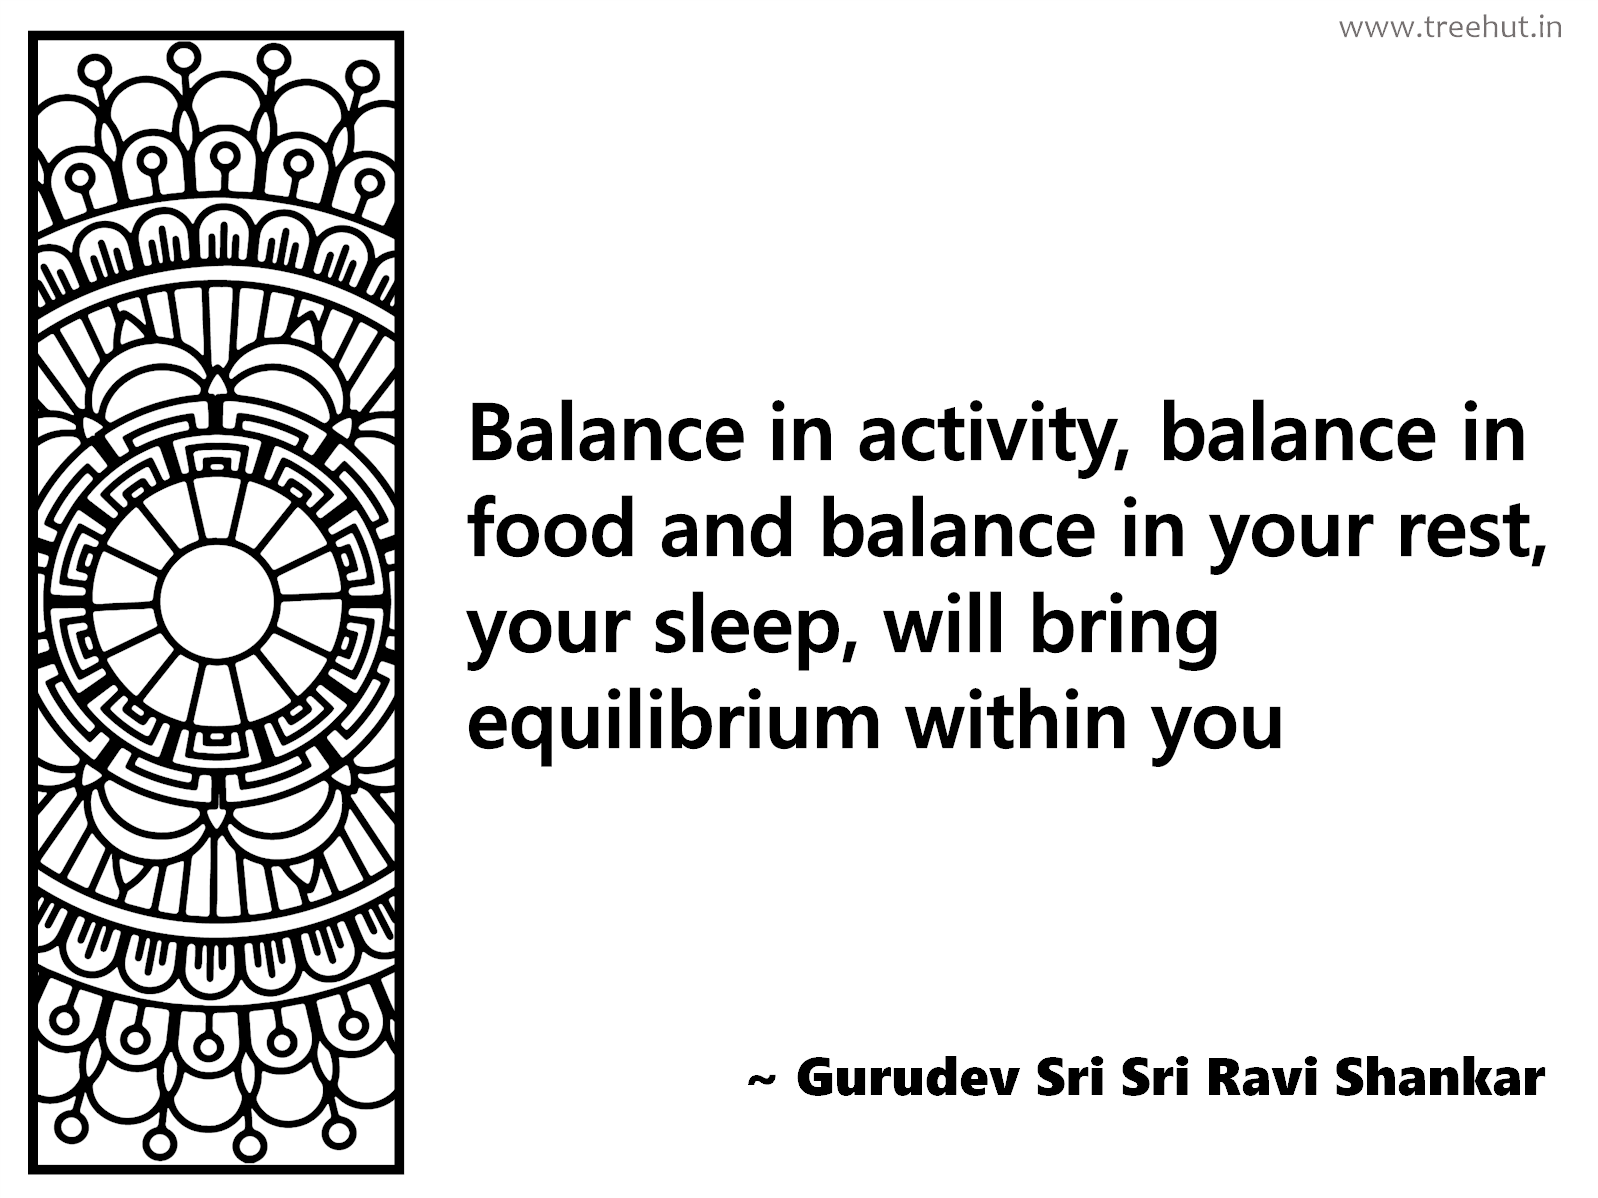 Balance in activity, balance in food and balance in your rest, your sleep, will bring equilibrium within you Inspirational Quote by Gurudev Sri Sri Ravi Shankar, coloring pages